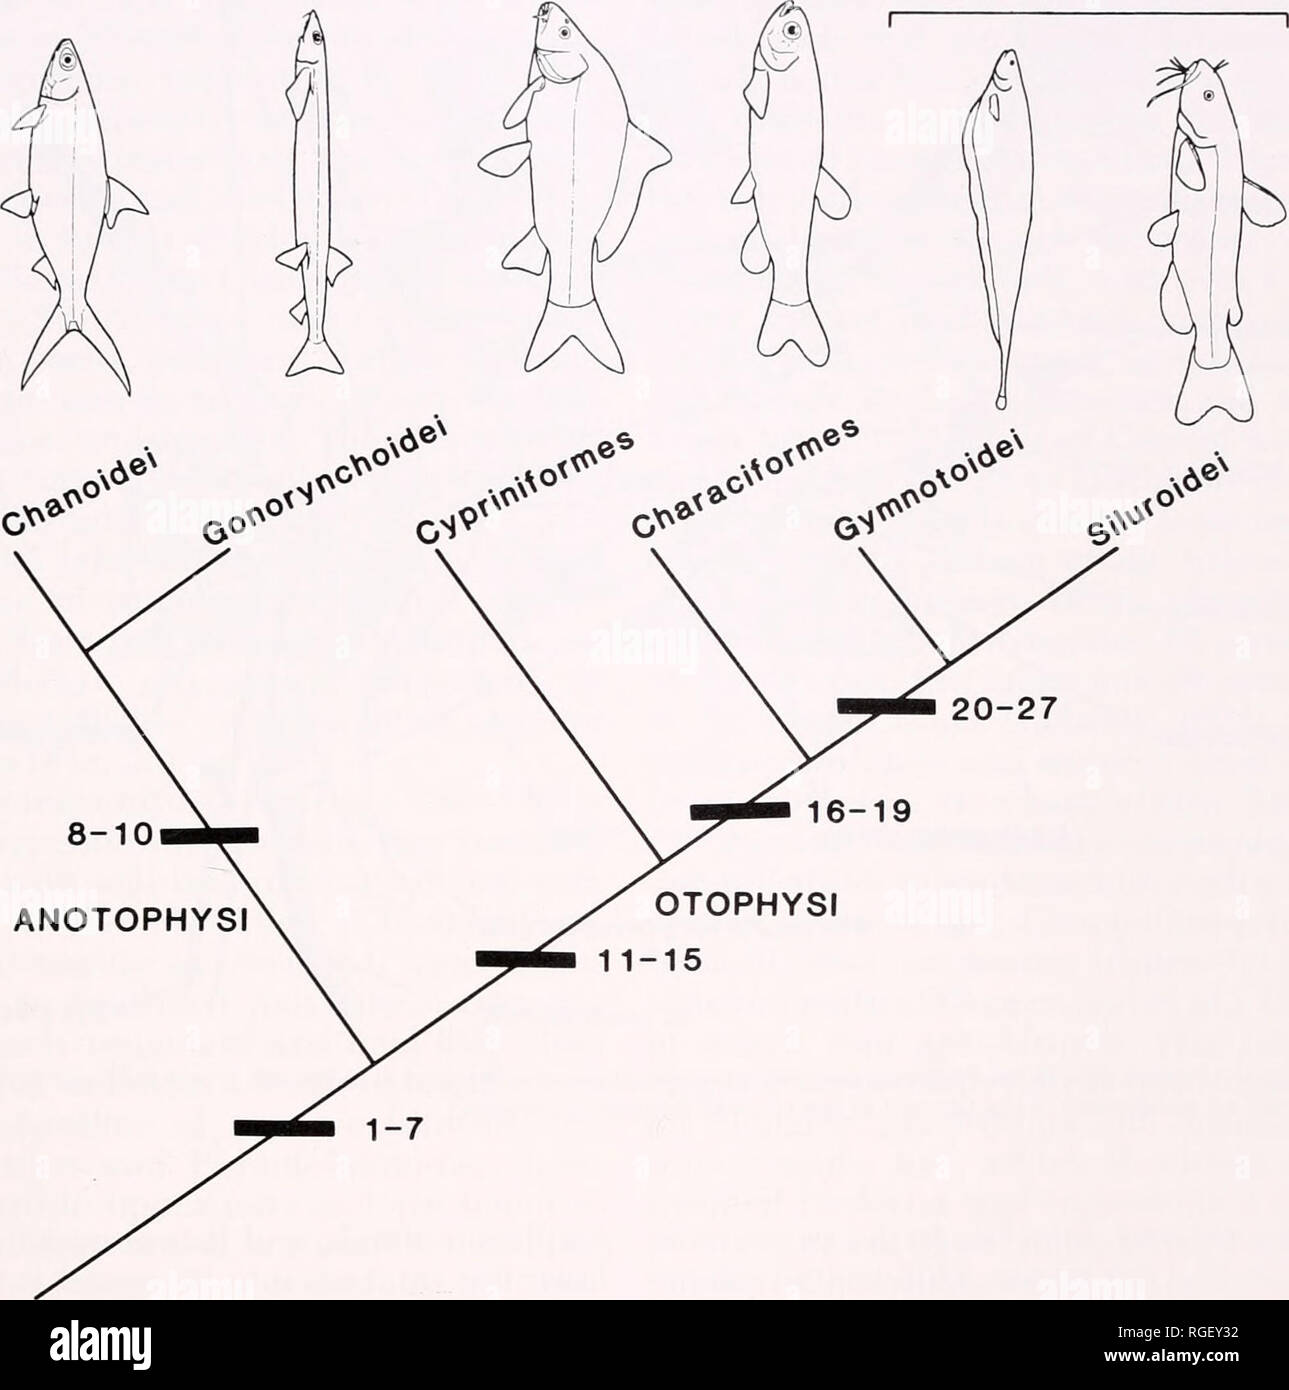 . Bulletin of the Museum of Comparative Zoology at Harvard College. Zoology. AcTiNOPTERYGiAN Interrelationships • Ijnulcr (ind IJcm 137 OSTARIOPHYSI Siluriformes. 20-27 16-19 OTOPHYSI 11-15 Figure 30. Phylogeny of the ostariophysan fishes (after Finl&lt; and Fink, 1981). Only a few of the many characters used by Fink and Fink (1981) to support this cladogram are presented here. The characters are; 1, loss of dermopalatine; 2, the swinnbladder is divided into a smaller anterior and a larger posterior chamber and the pneumatic duct enters the bladder near the apposition of the two swimbladder ch Stock Photo